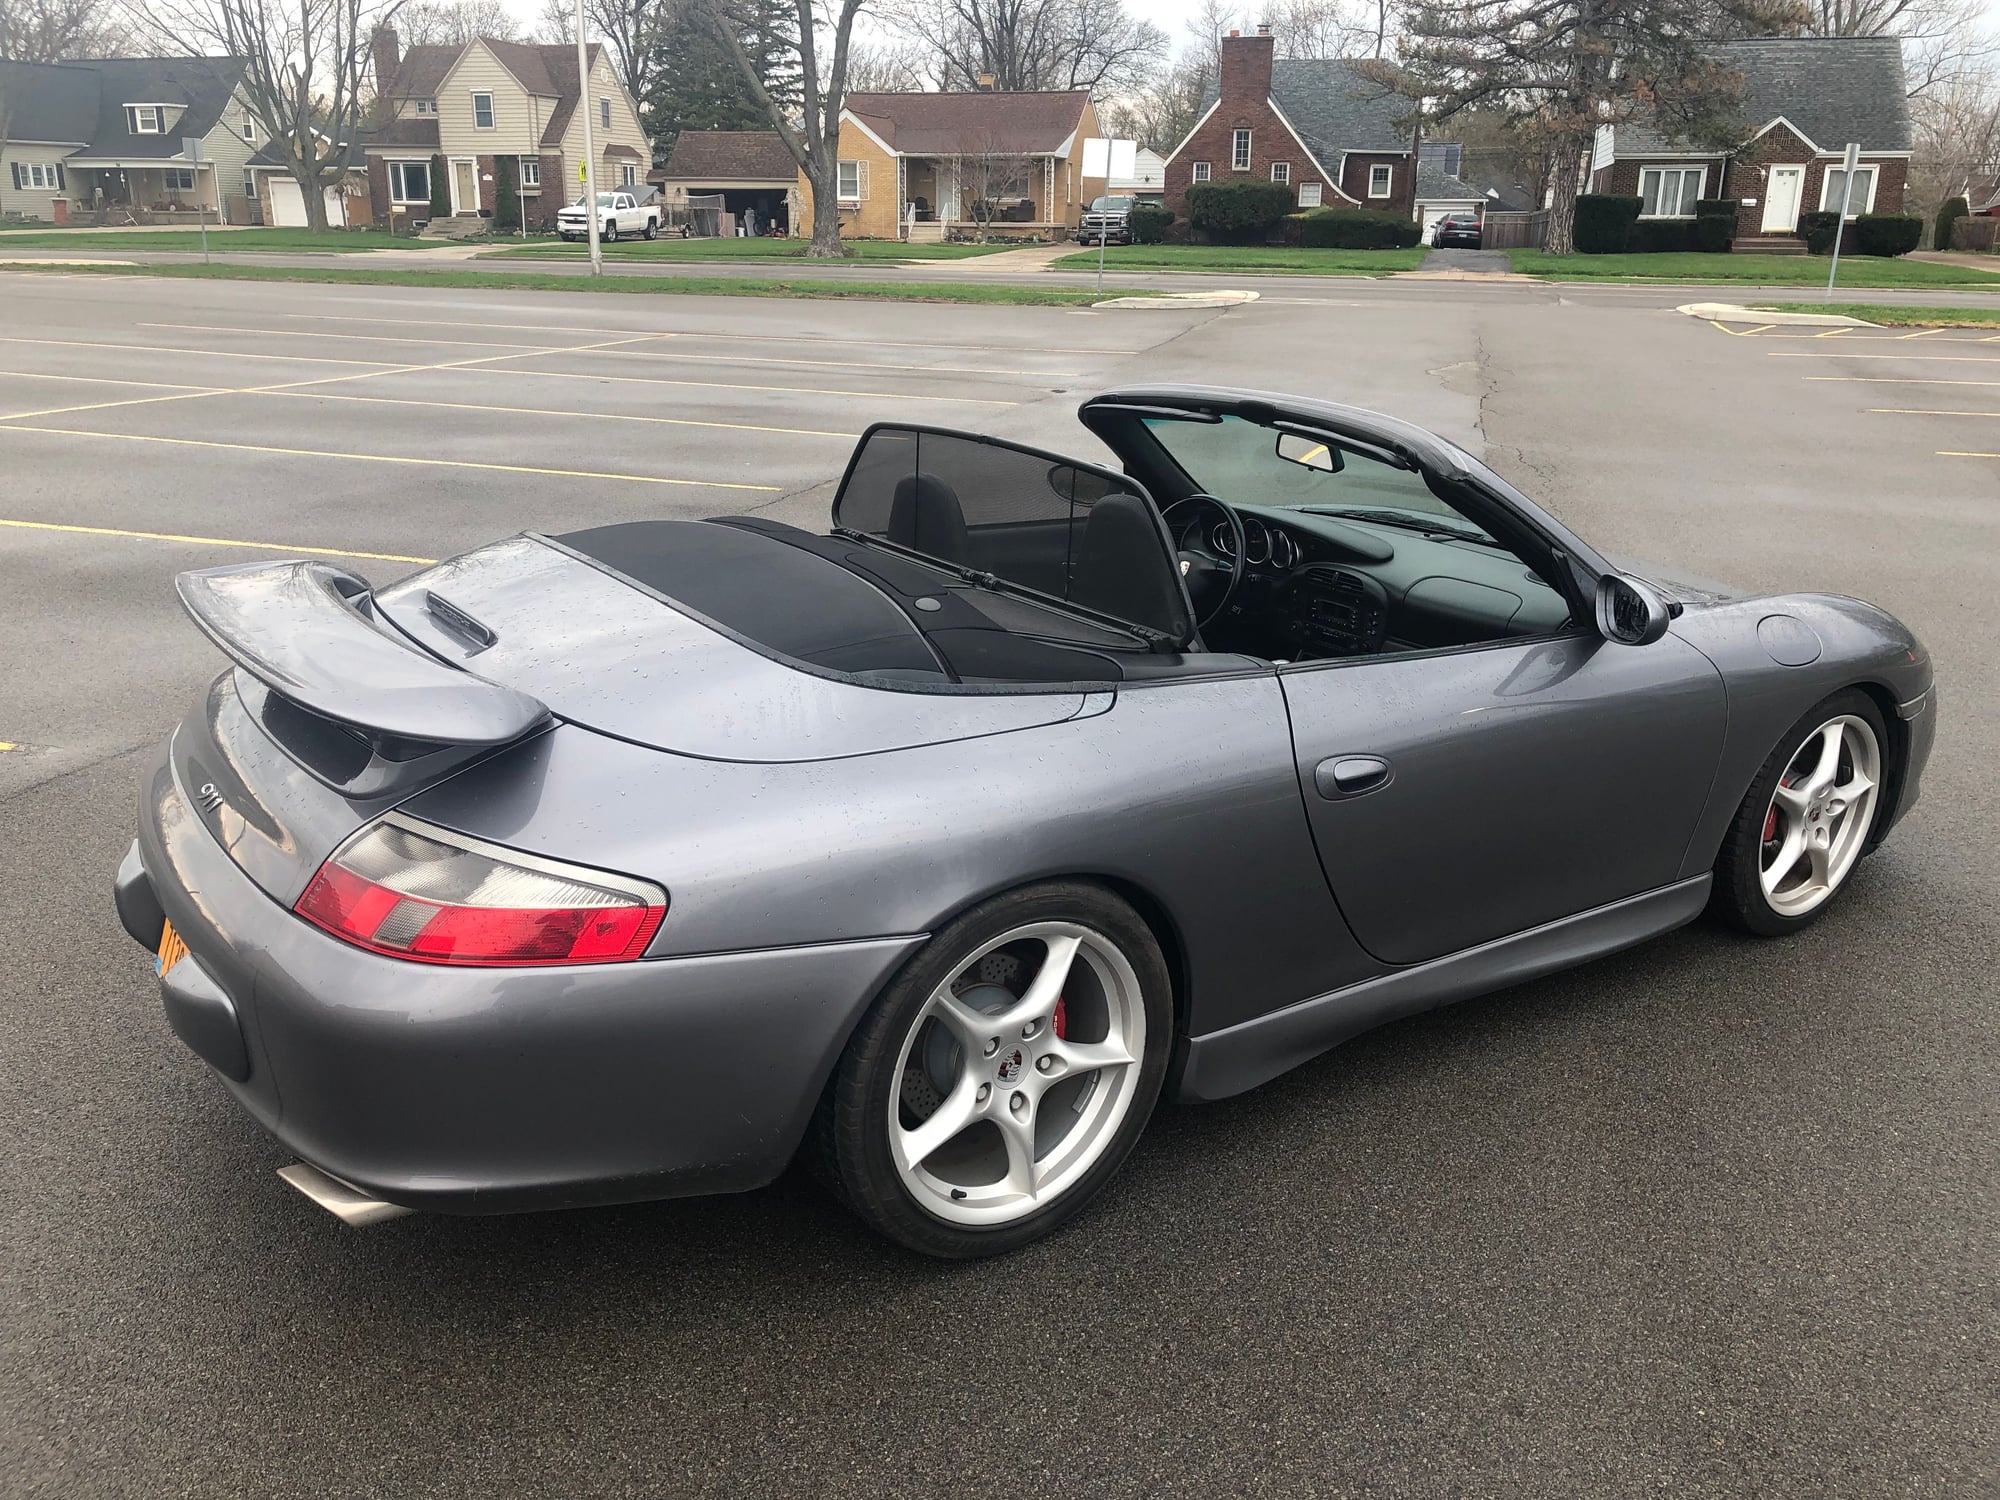 2002 Porsche 911 - 2002 Porsche 911 Cabriolet 996.2 - Used - VIN WP0CA29912S652236 - 115,000 Miles - 6 cyl - 2WD - Manual - Convertible - Gray - Buffalo, NY 14223, United States